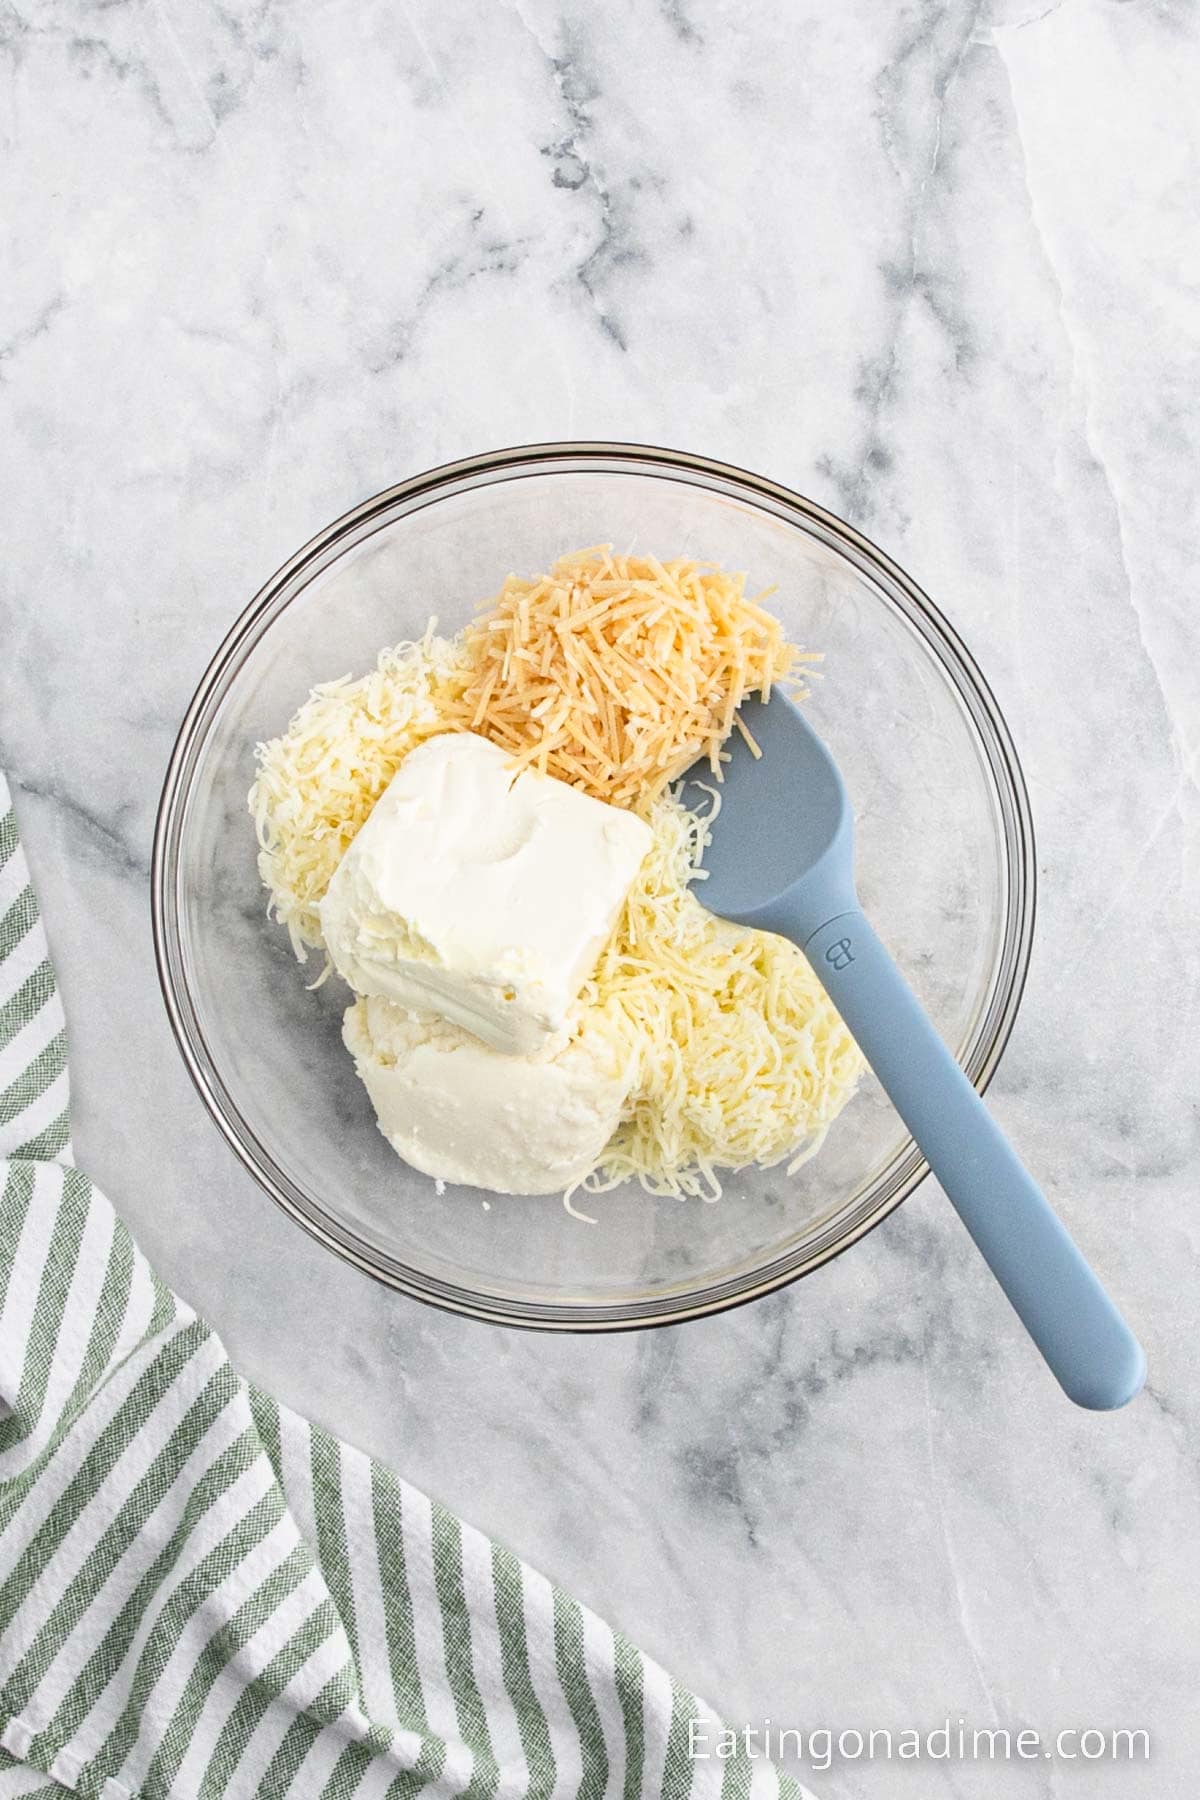 Combining the cheese together in a bowl